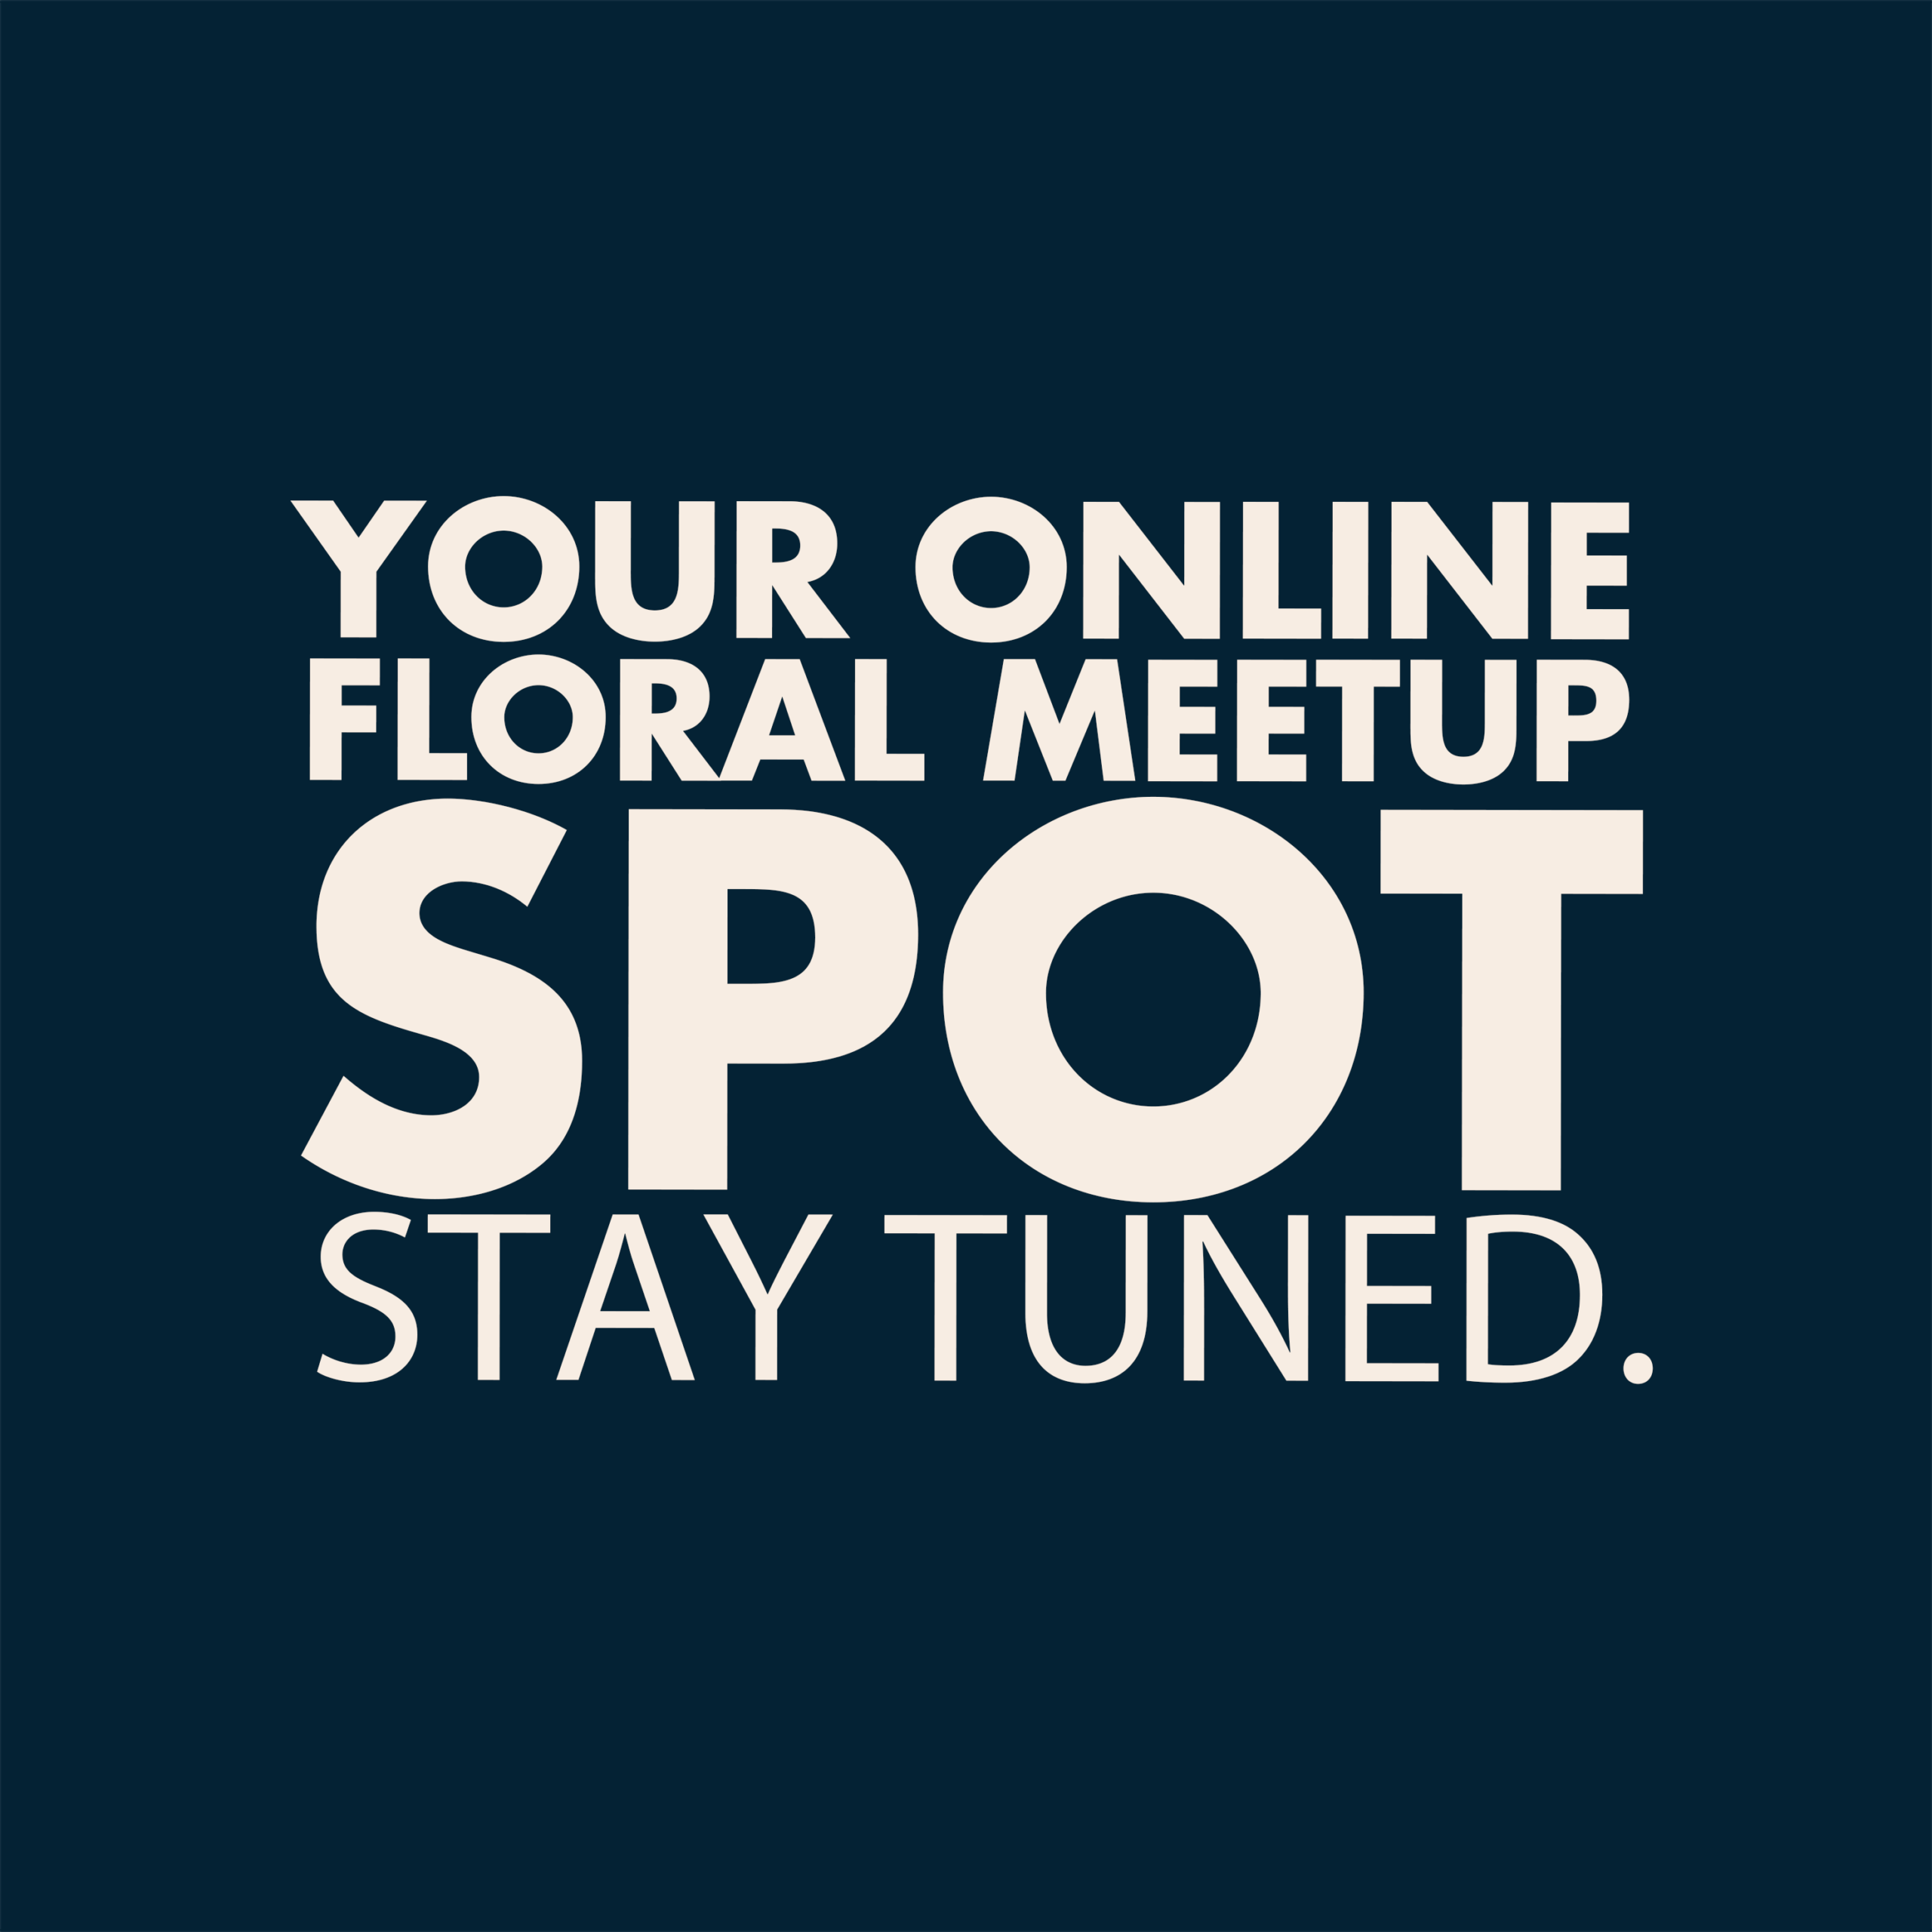 Tile Your Online Floral meetup Spot Stay Tuned